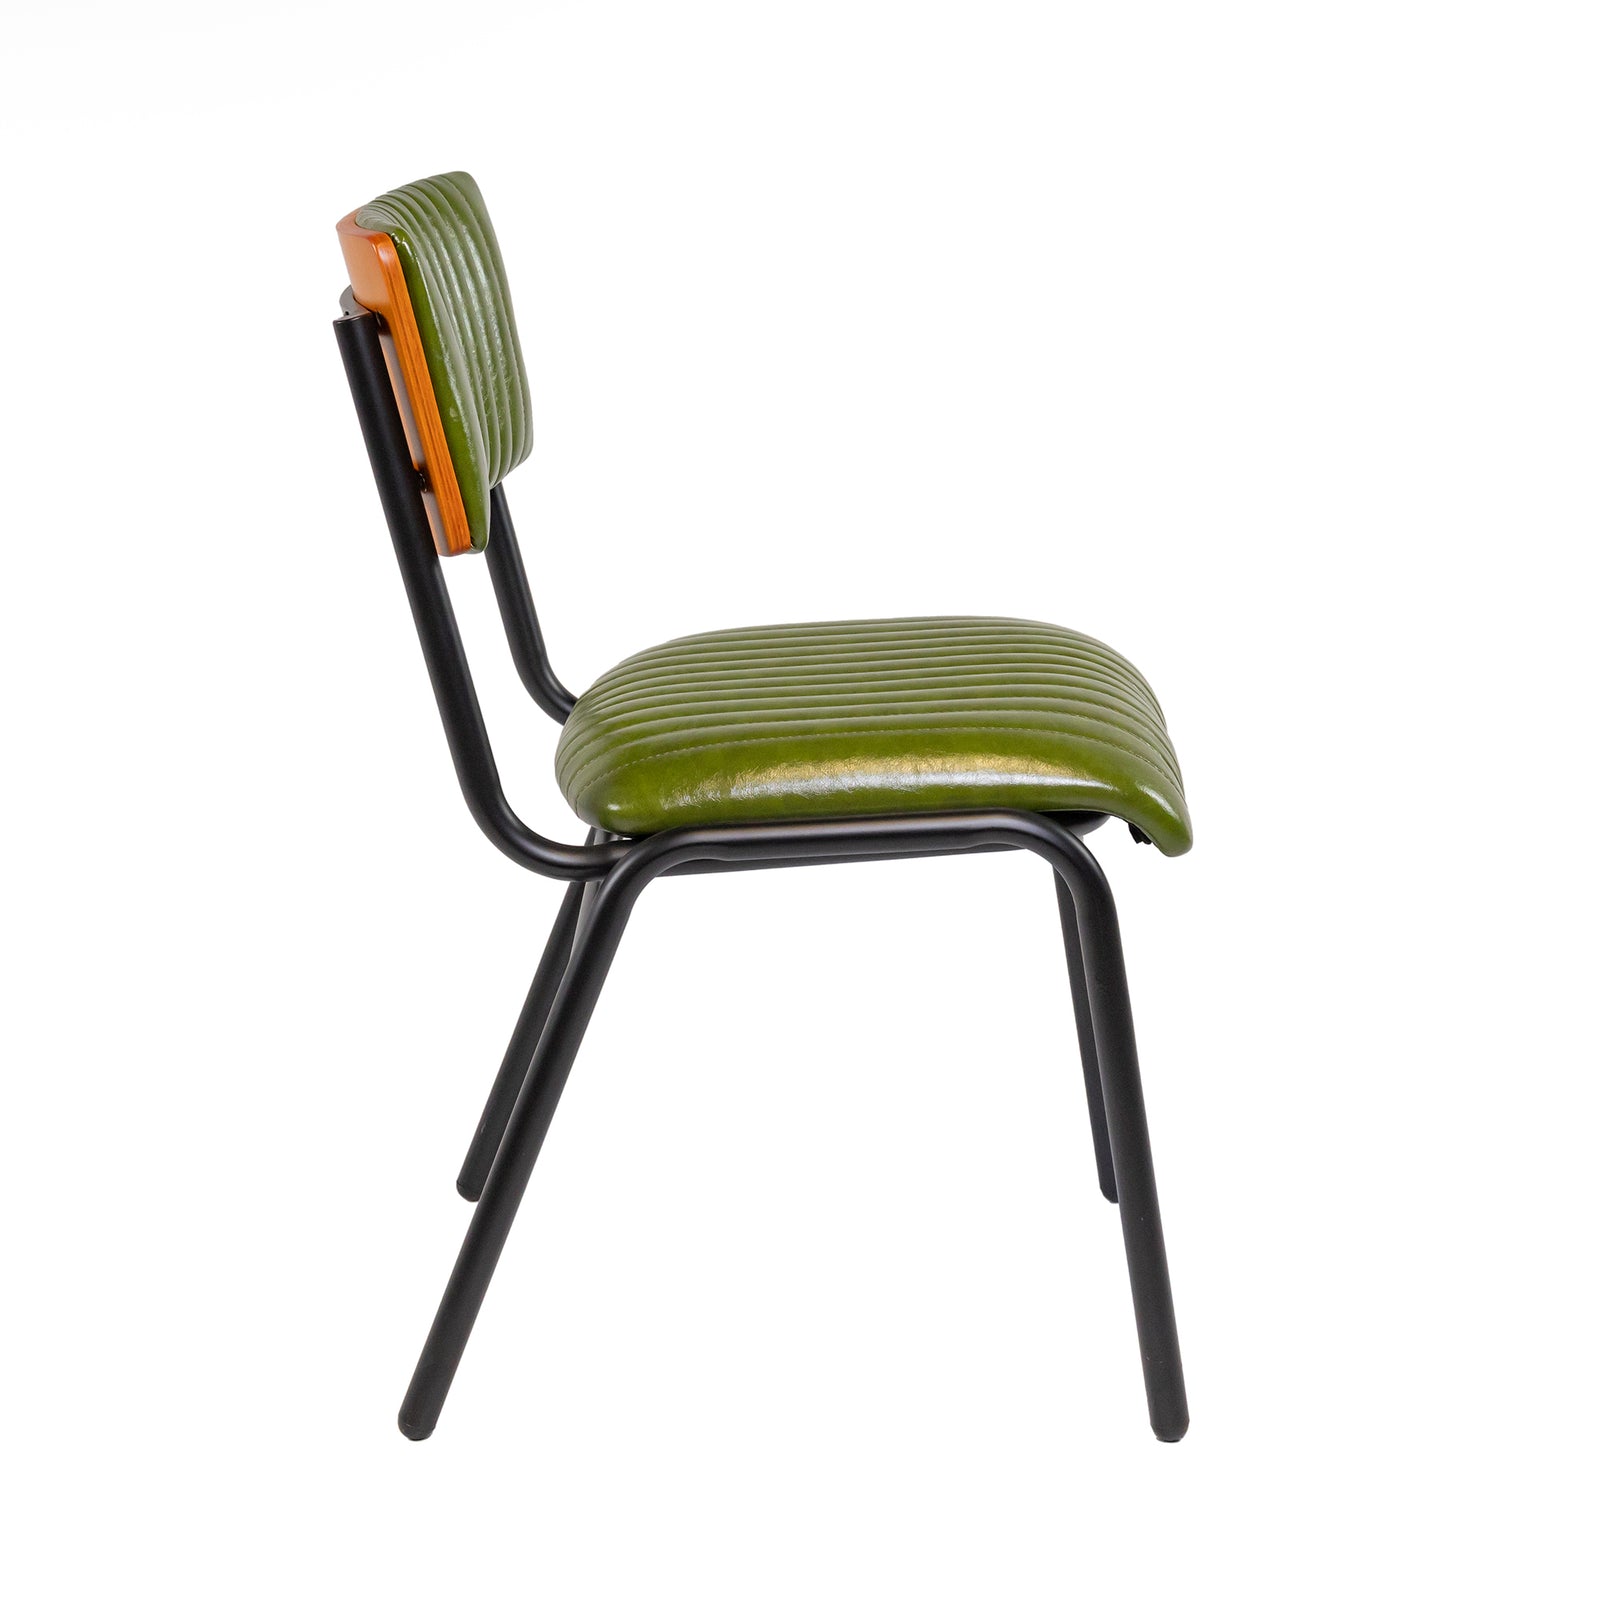 Hipster Leather Upholstered Metal Side Chair - Green